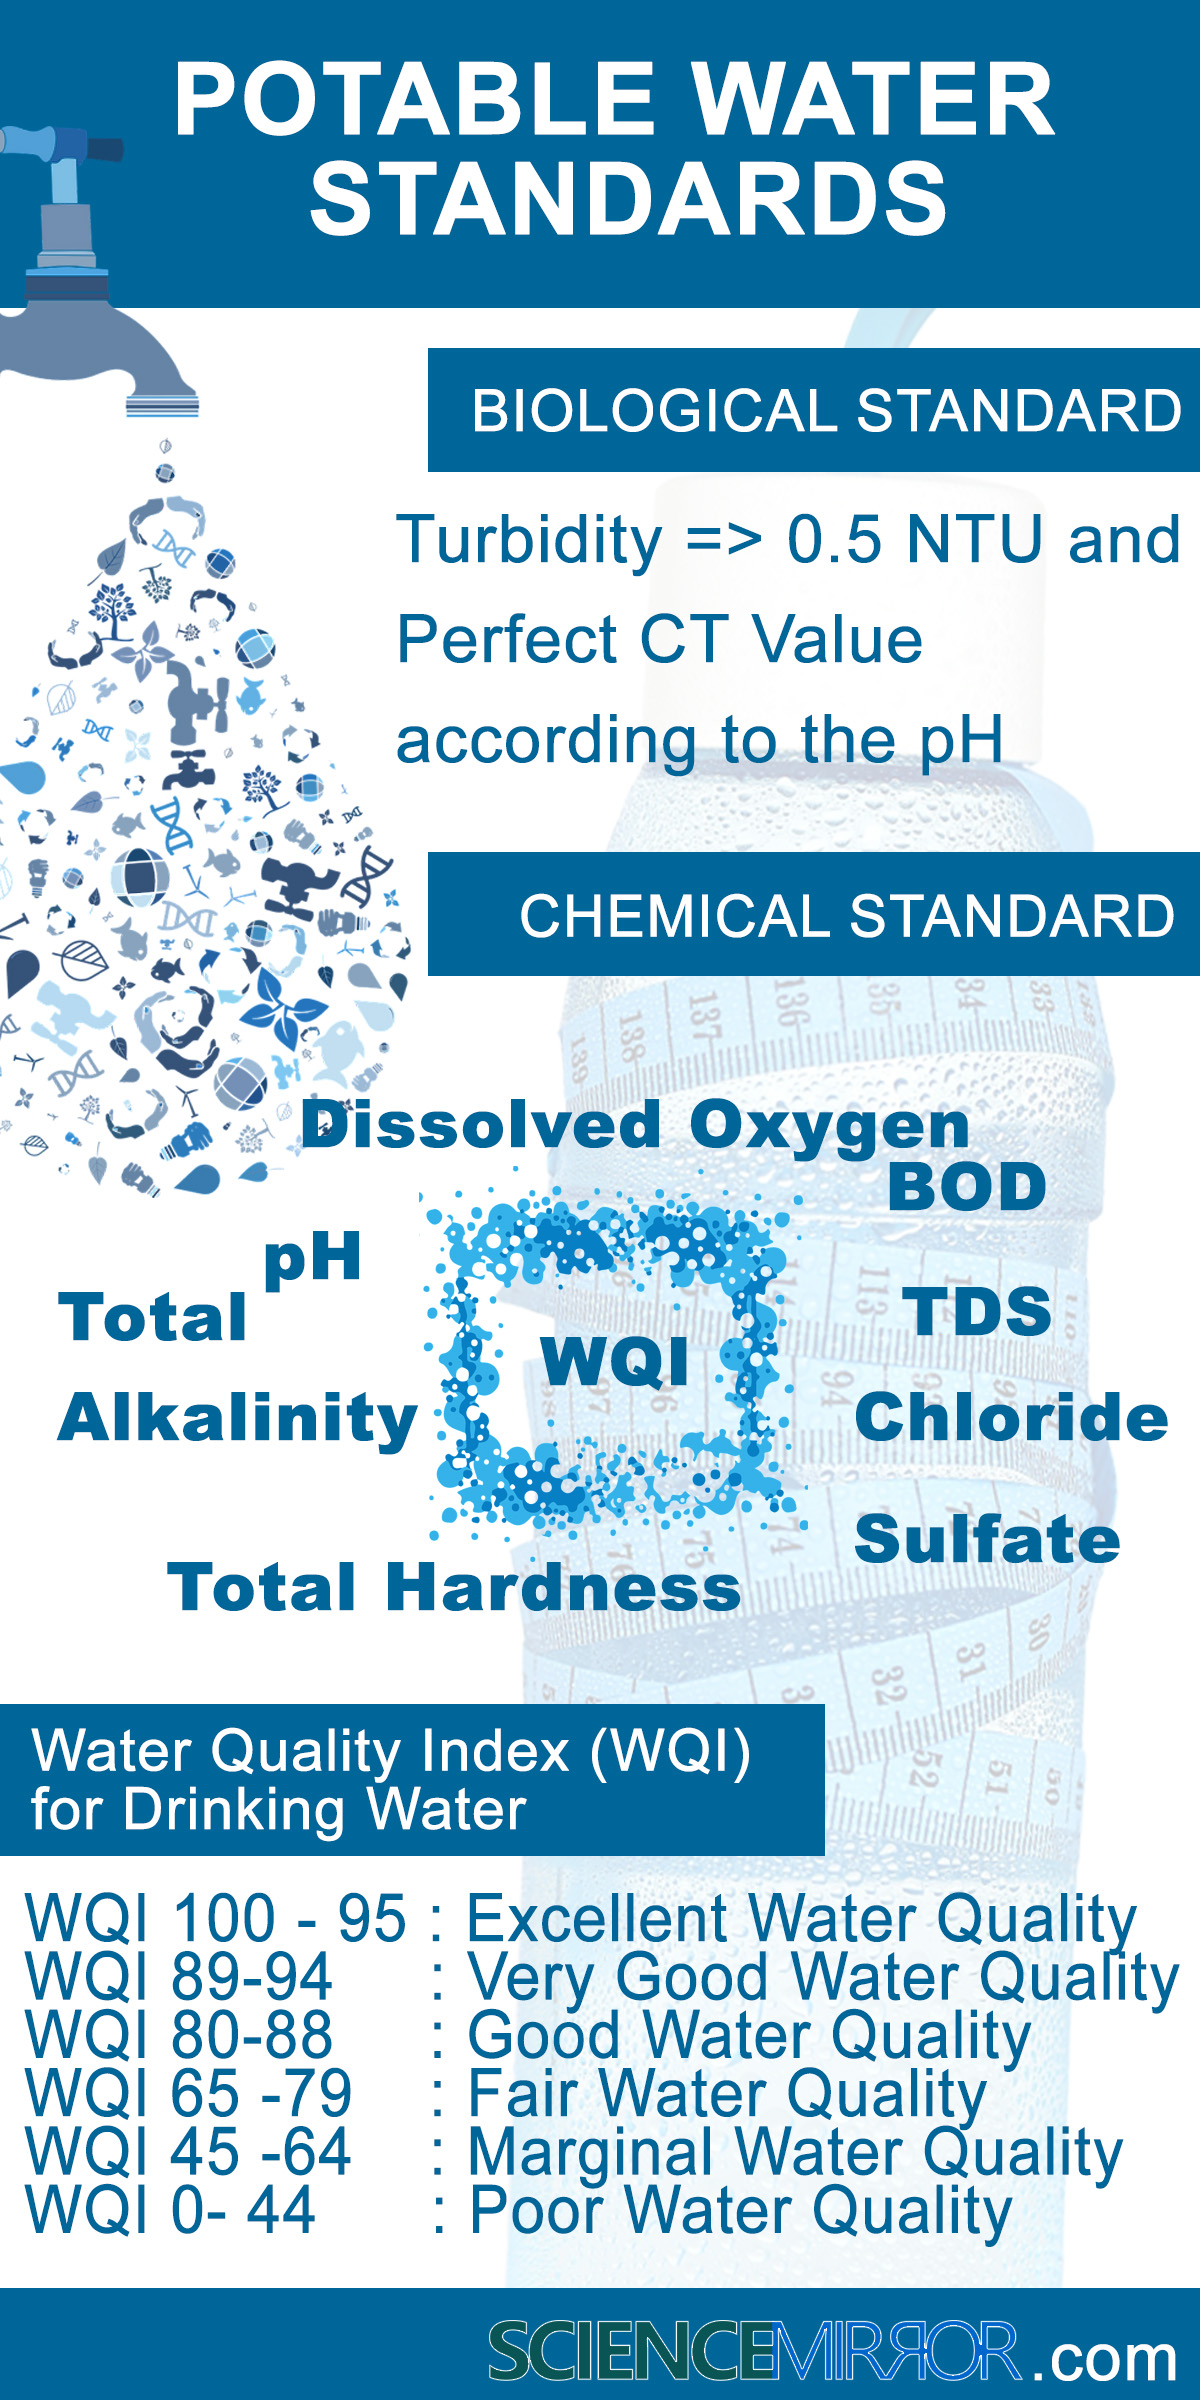 Infographic for potable water standards